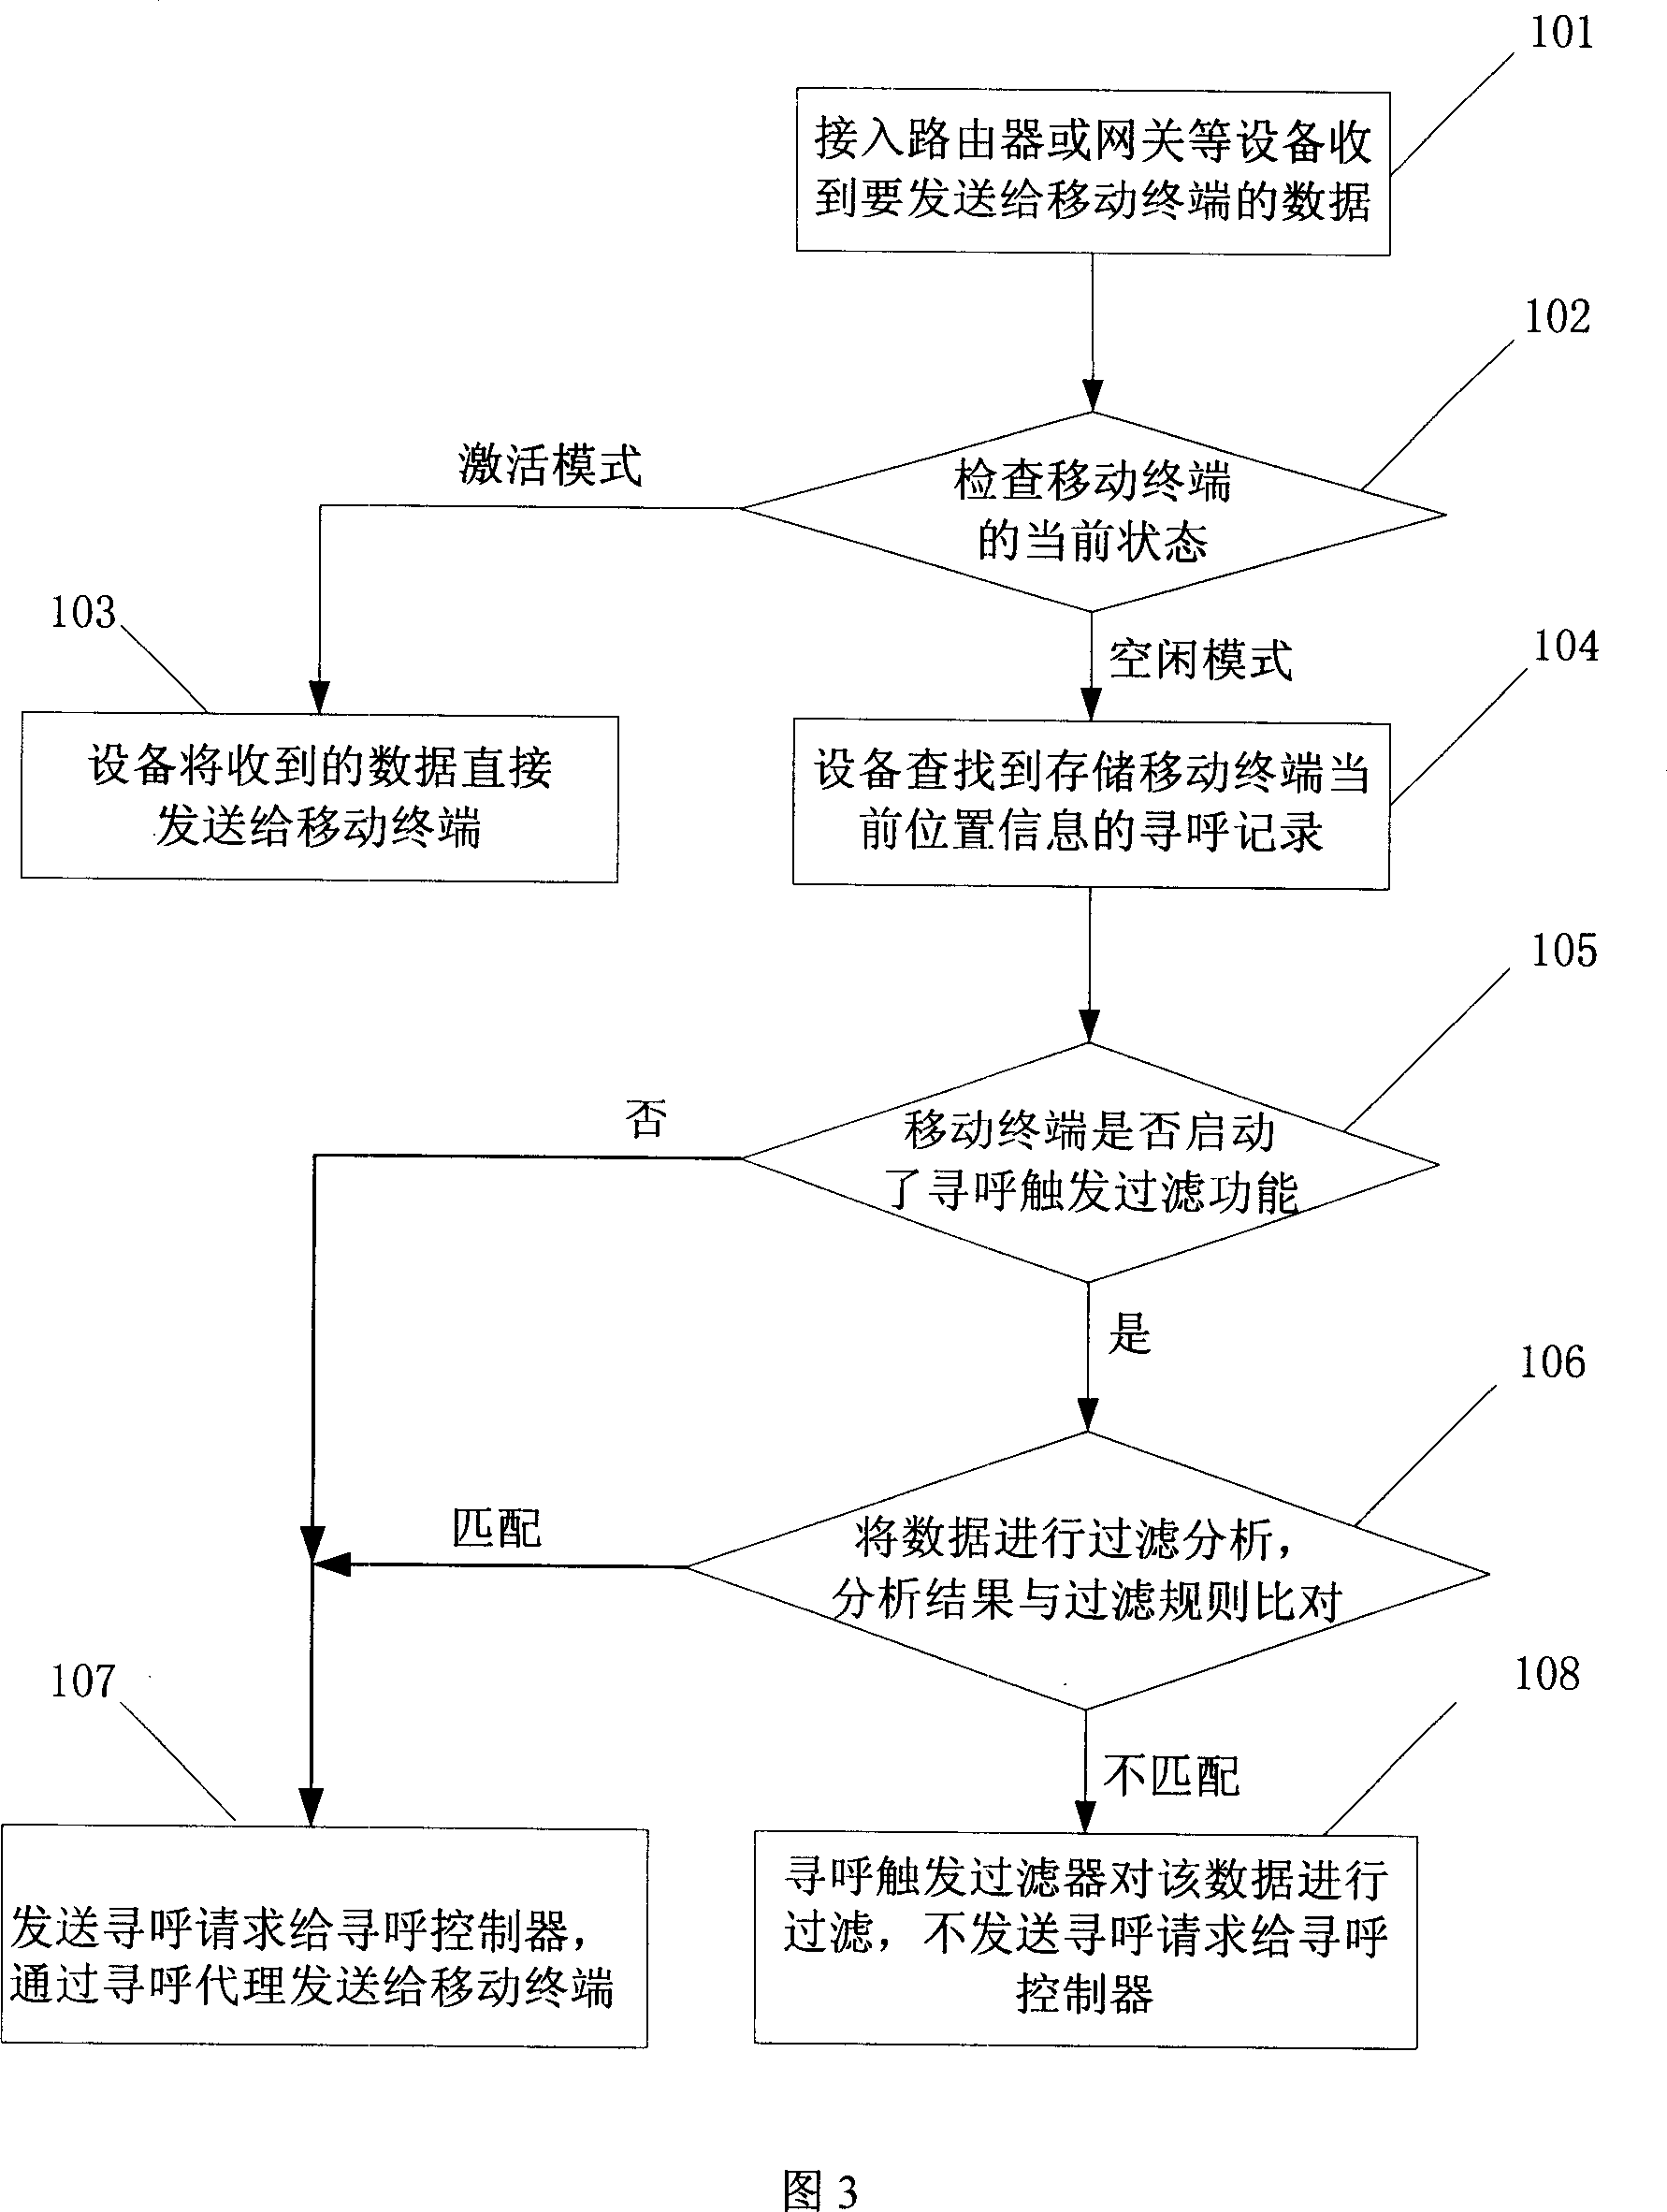 Method and apparatus for saving network wireless resource and mobile terminal cell